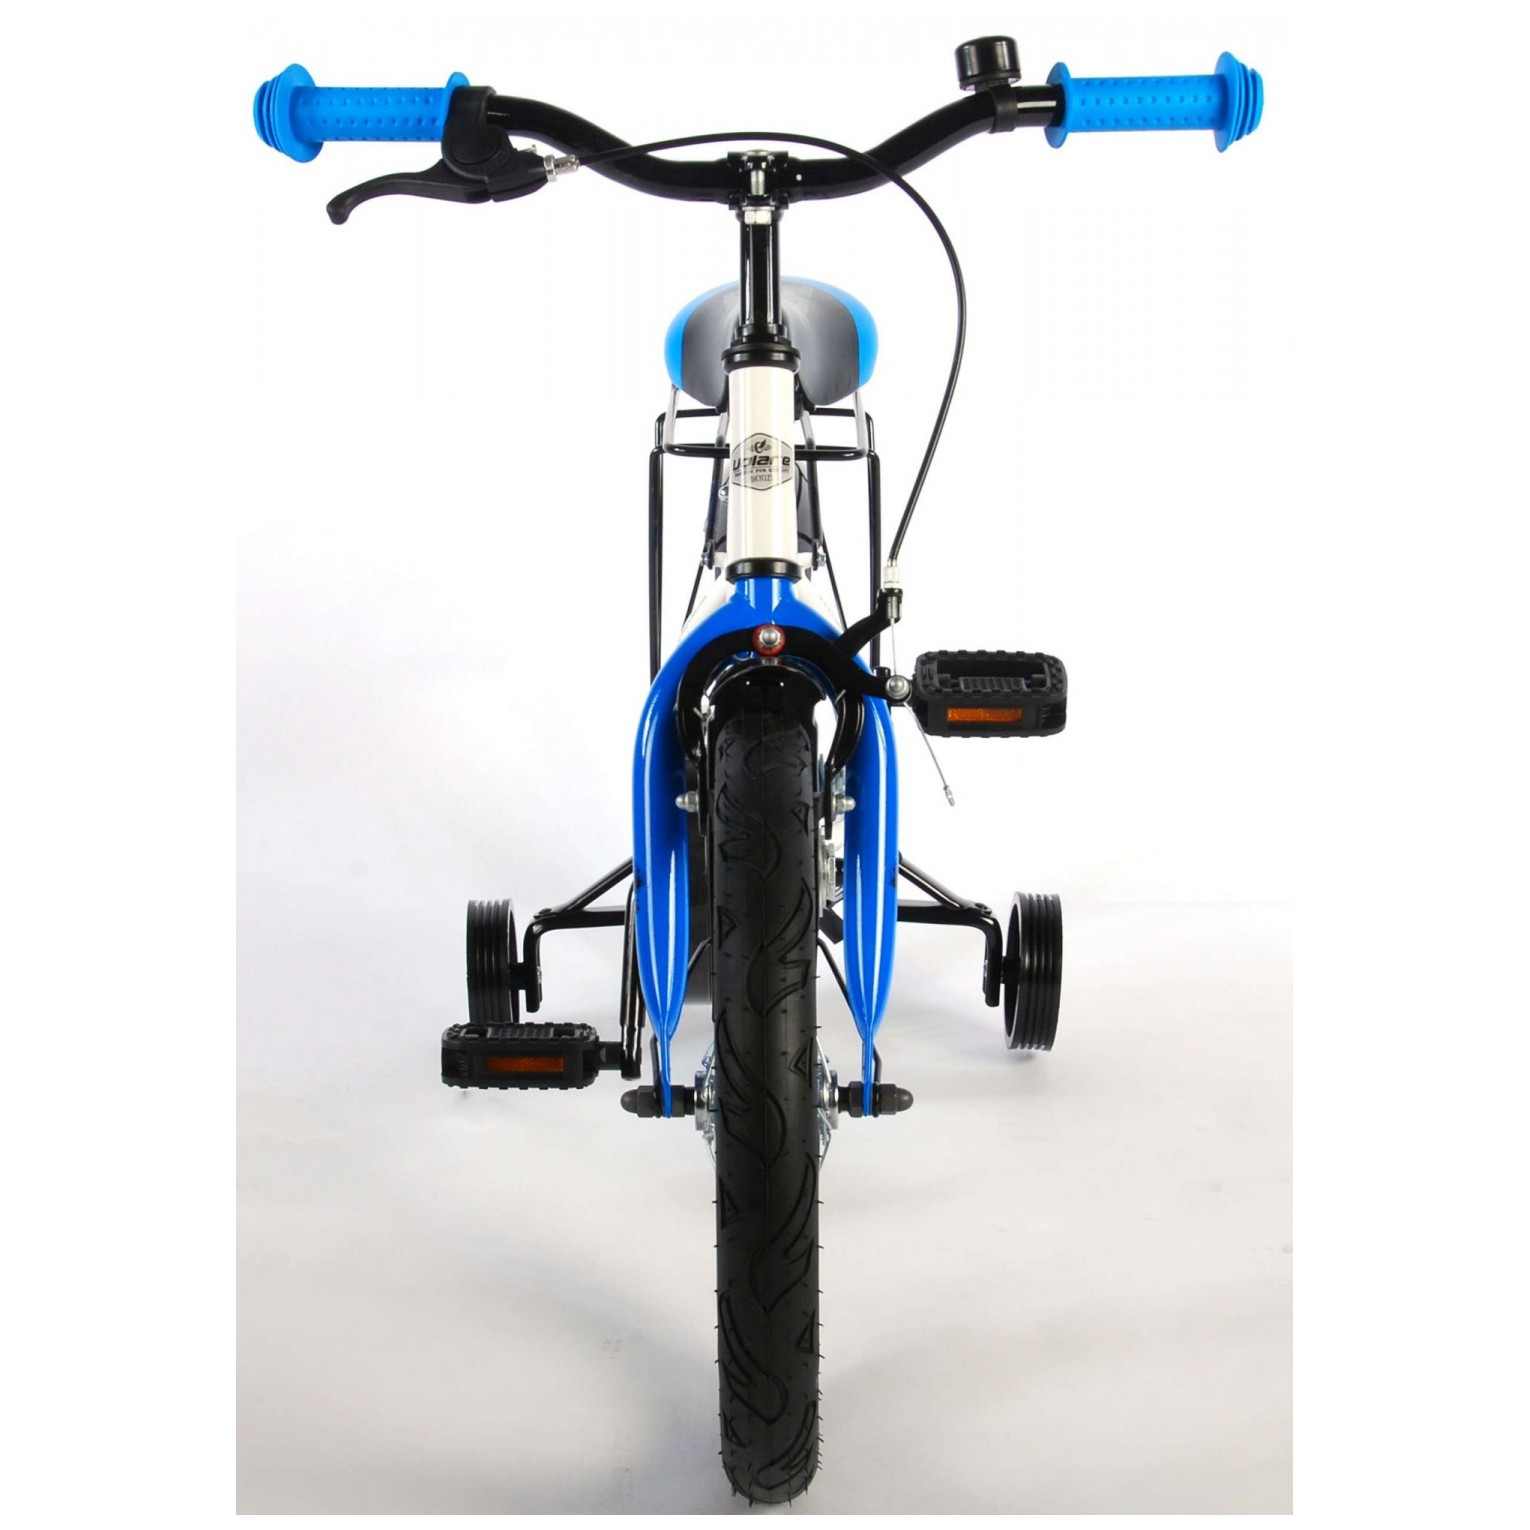 Volare Thombike Fiets - 16 inch - Wit Blauw